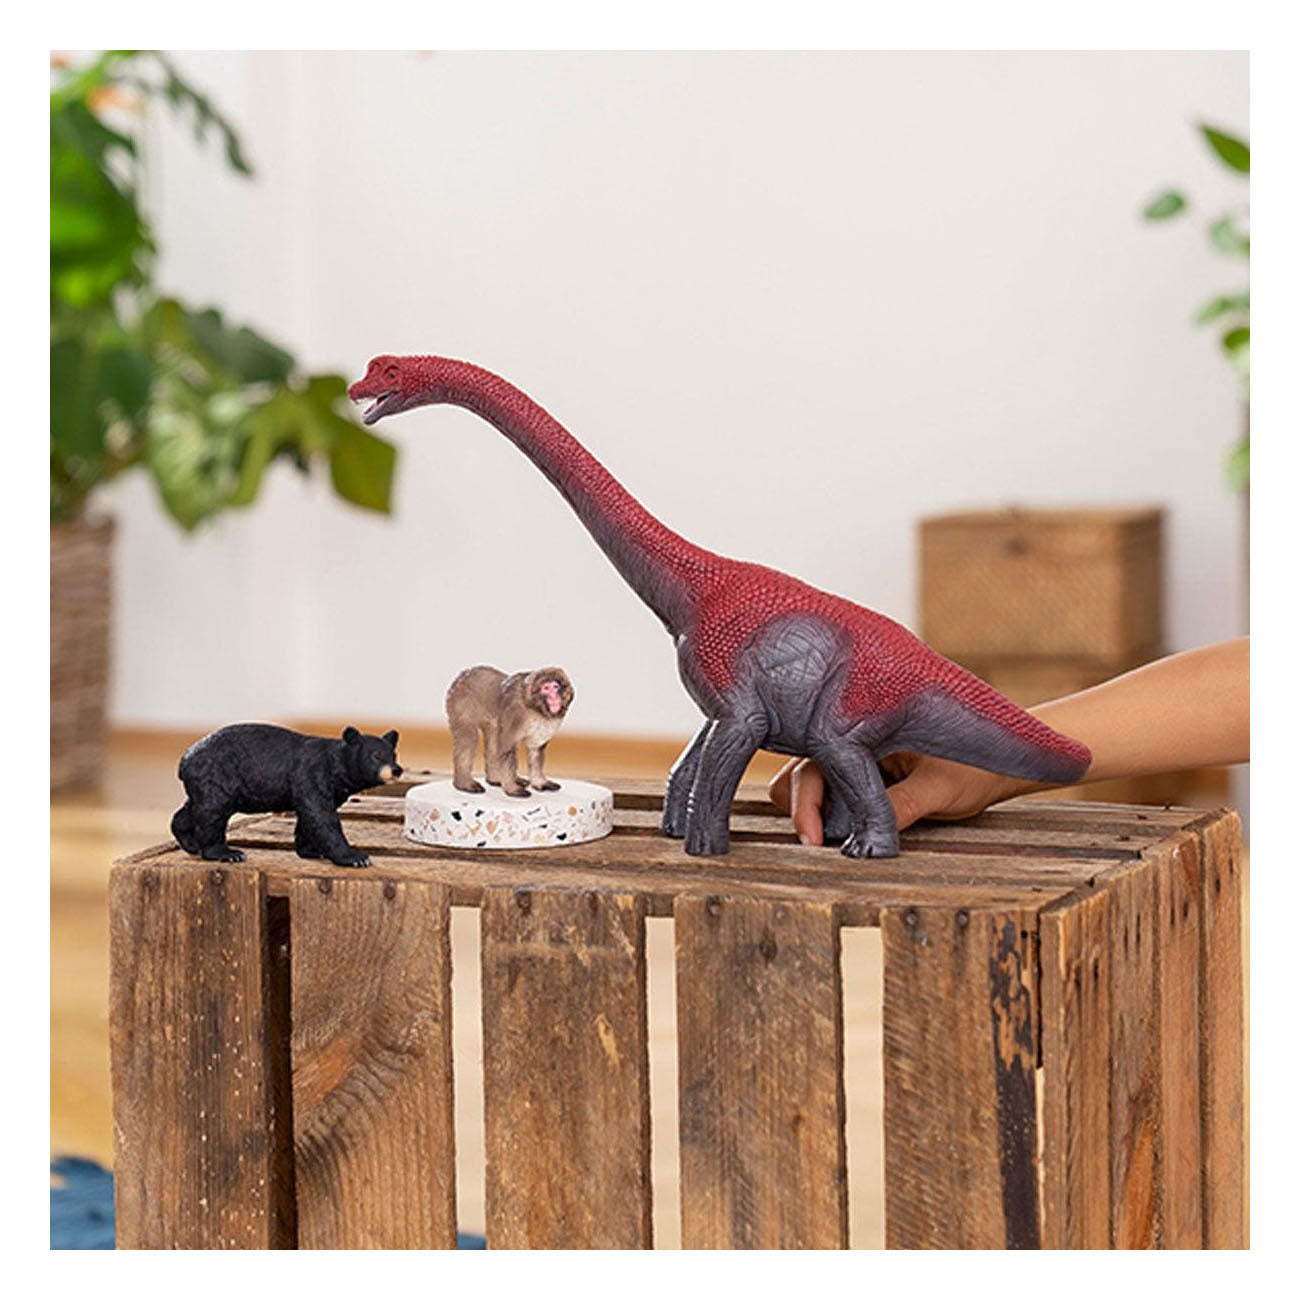 Schleich Wild Life giapponese Makaak 14871